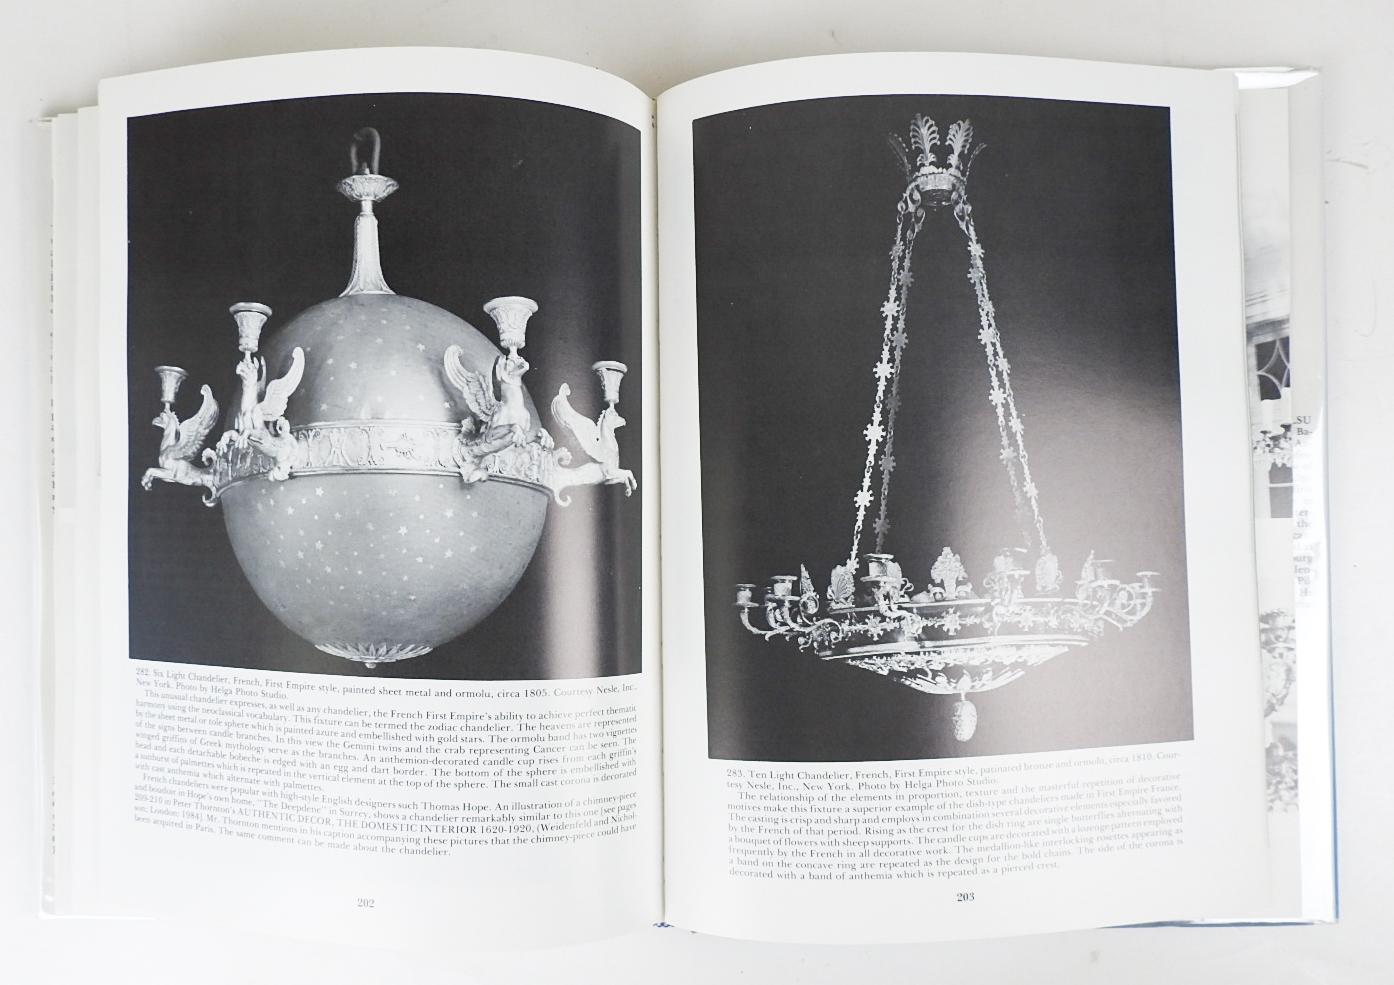 Late 20th Century Nineteenth Century Lighting Candle-Powered Devices 1783 to 1883 Book For Sale